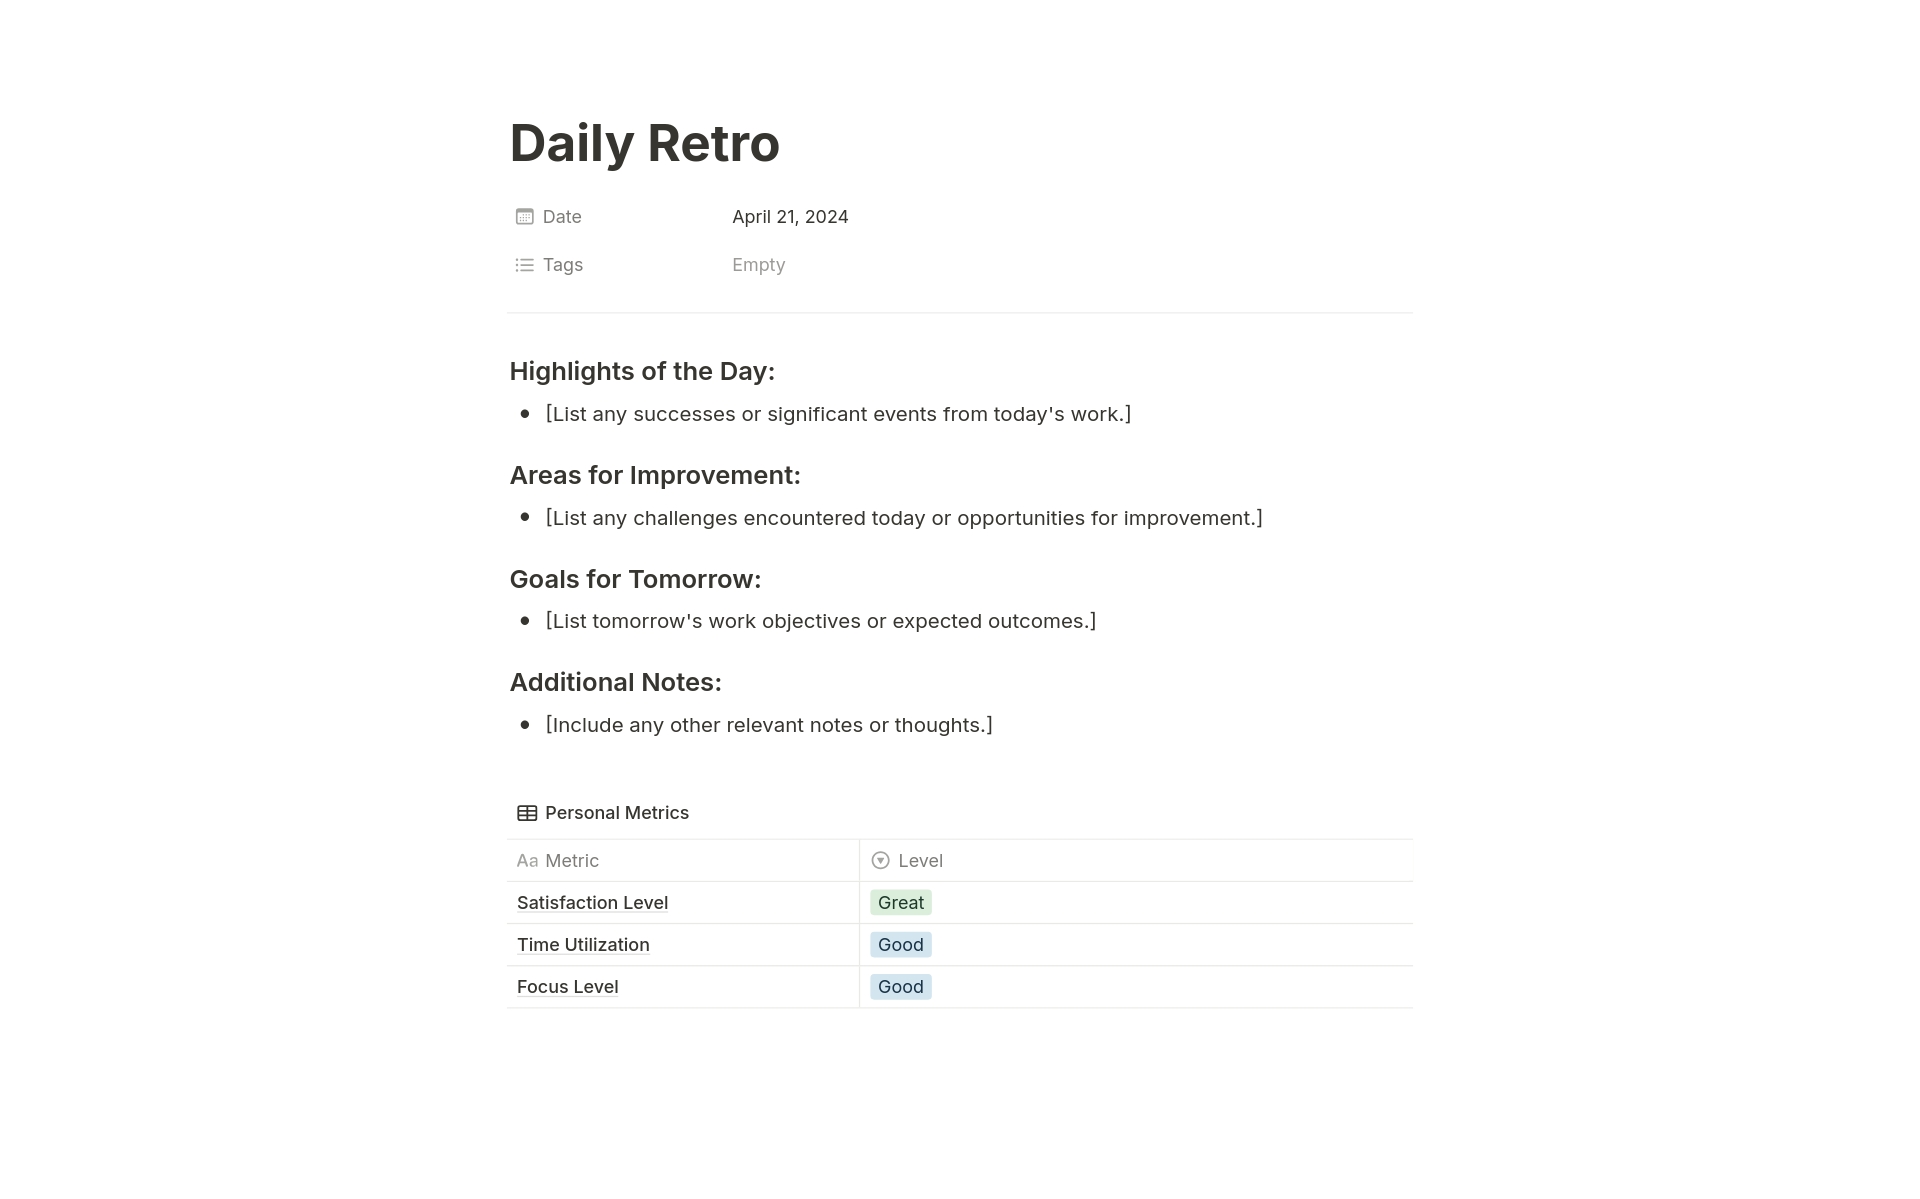 The Daily Retro template: a 5-minute reflection tool for remote software engineers. Track satisfaction, time use, and focus. Simple, honest, and fosters continuous improvement.